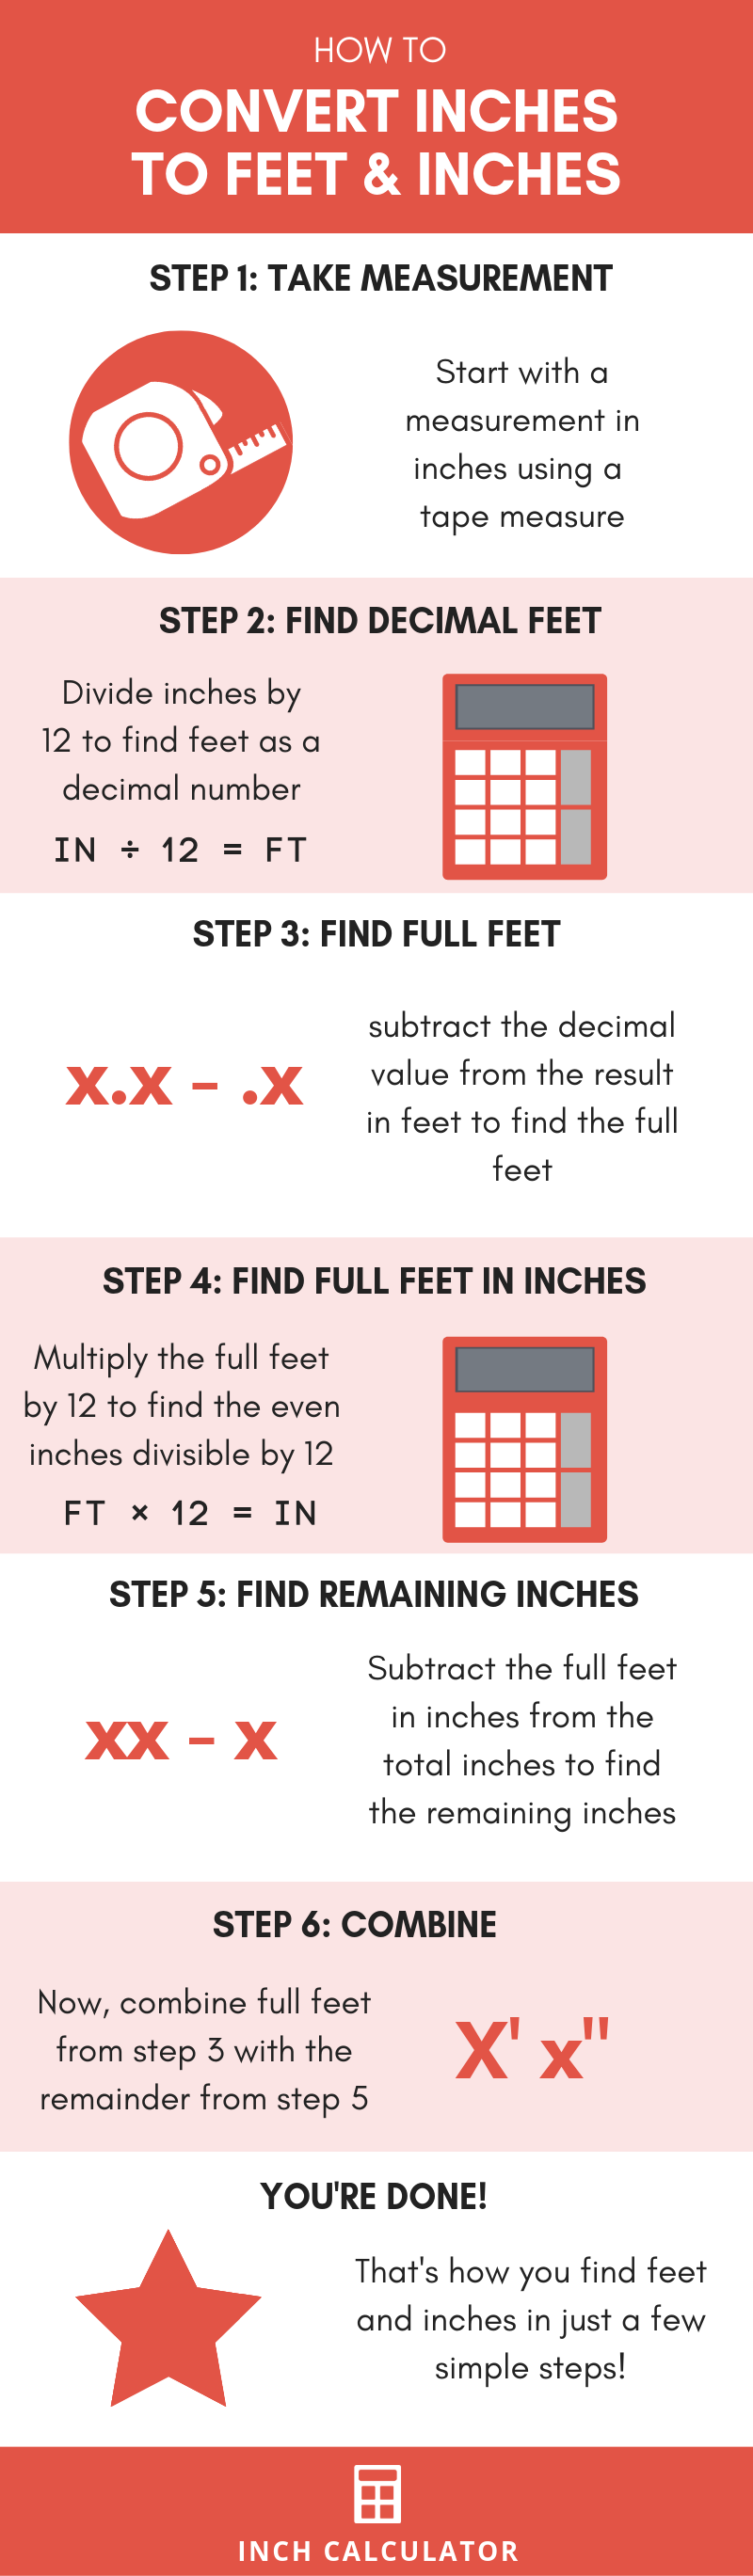 How to Convert Feet to Inches? Formula, Conversion, Examples